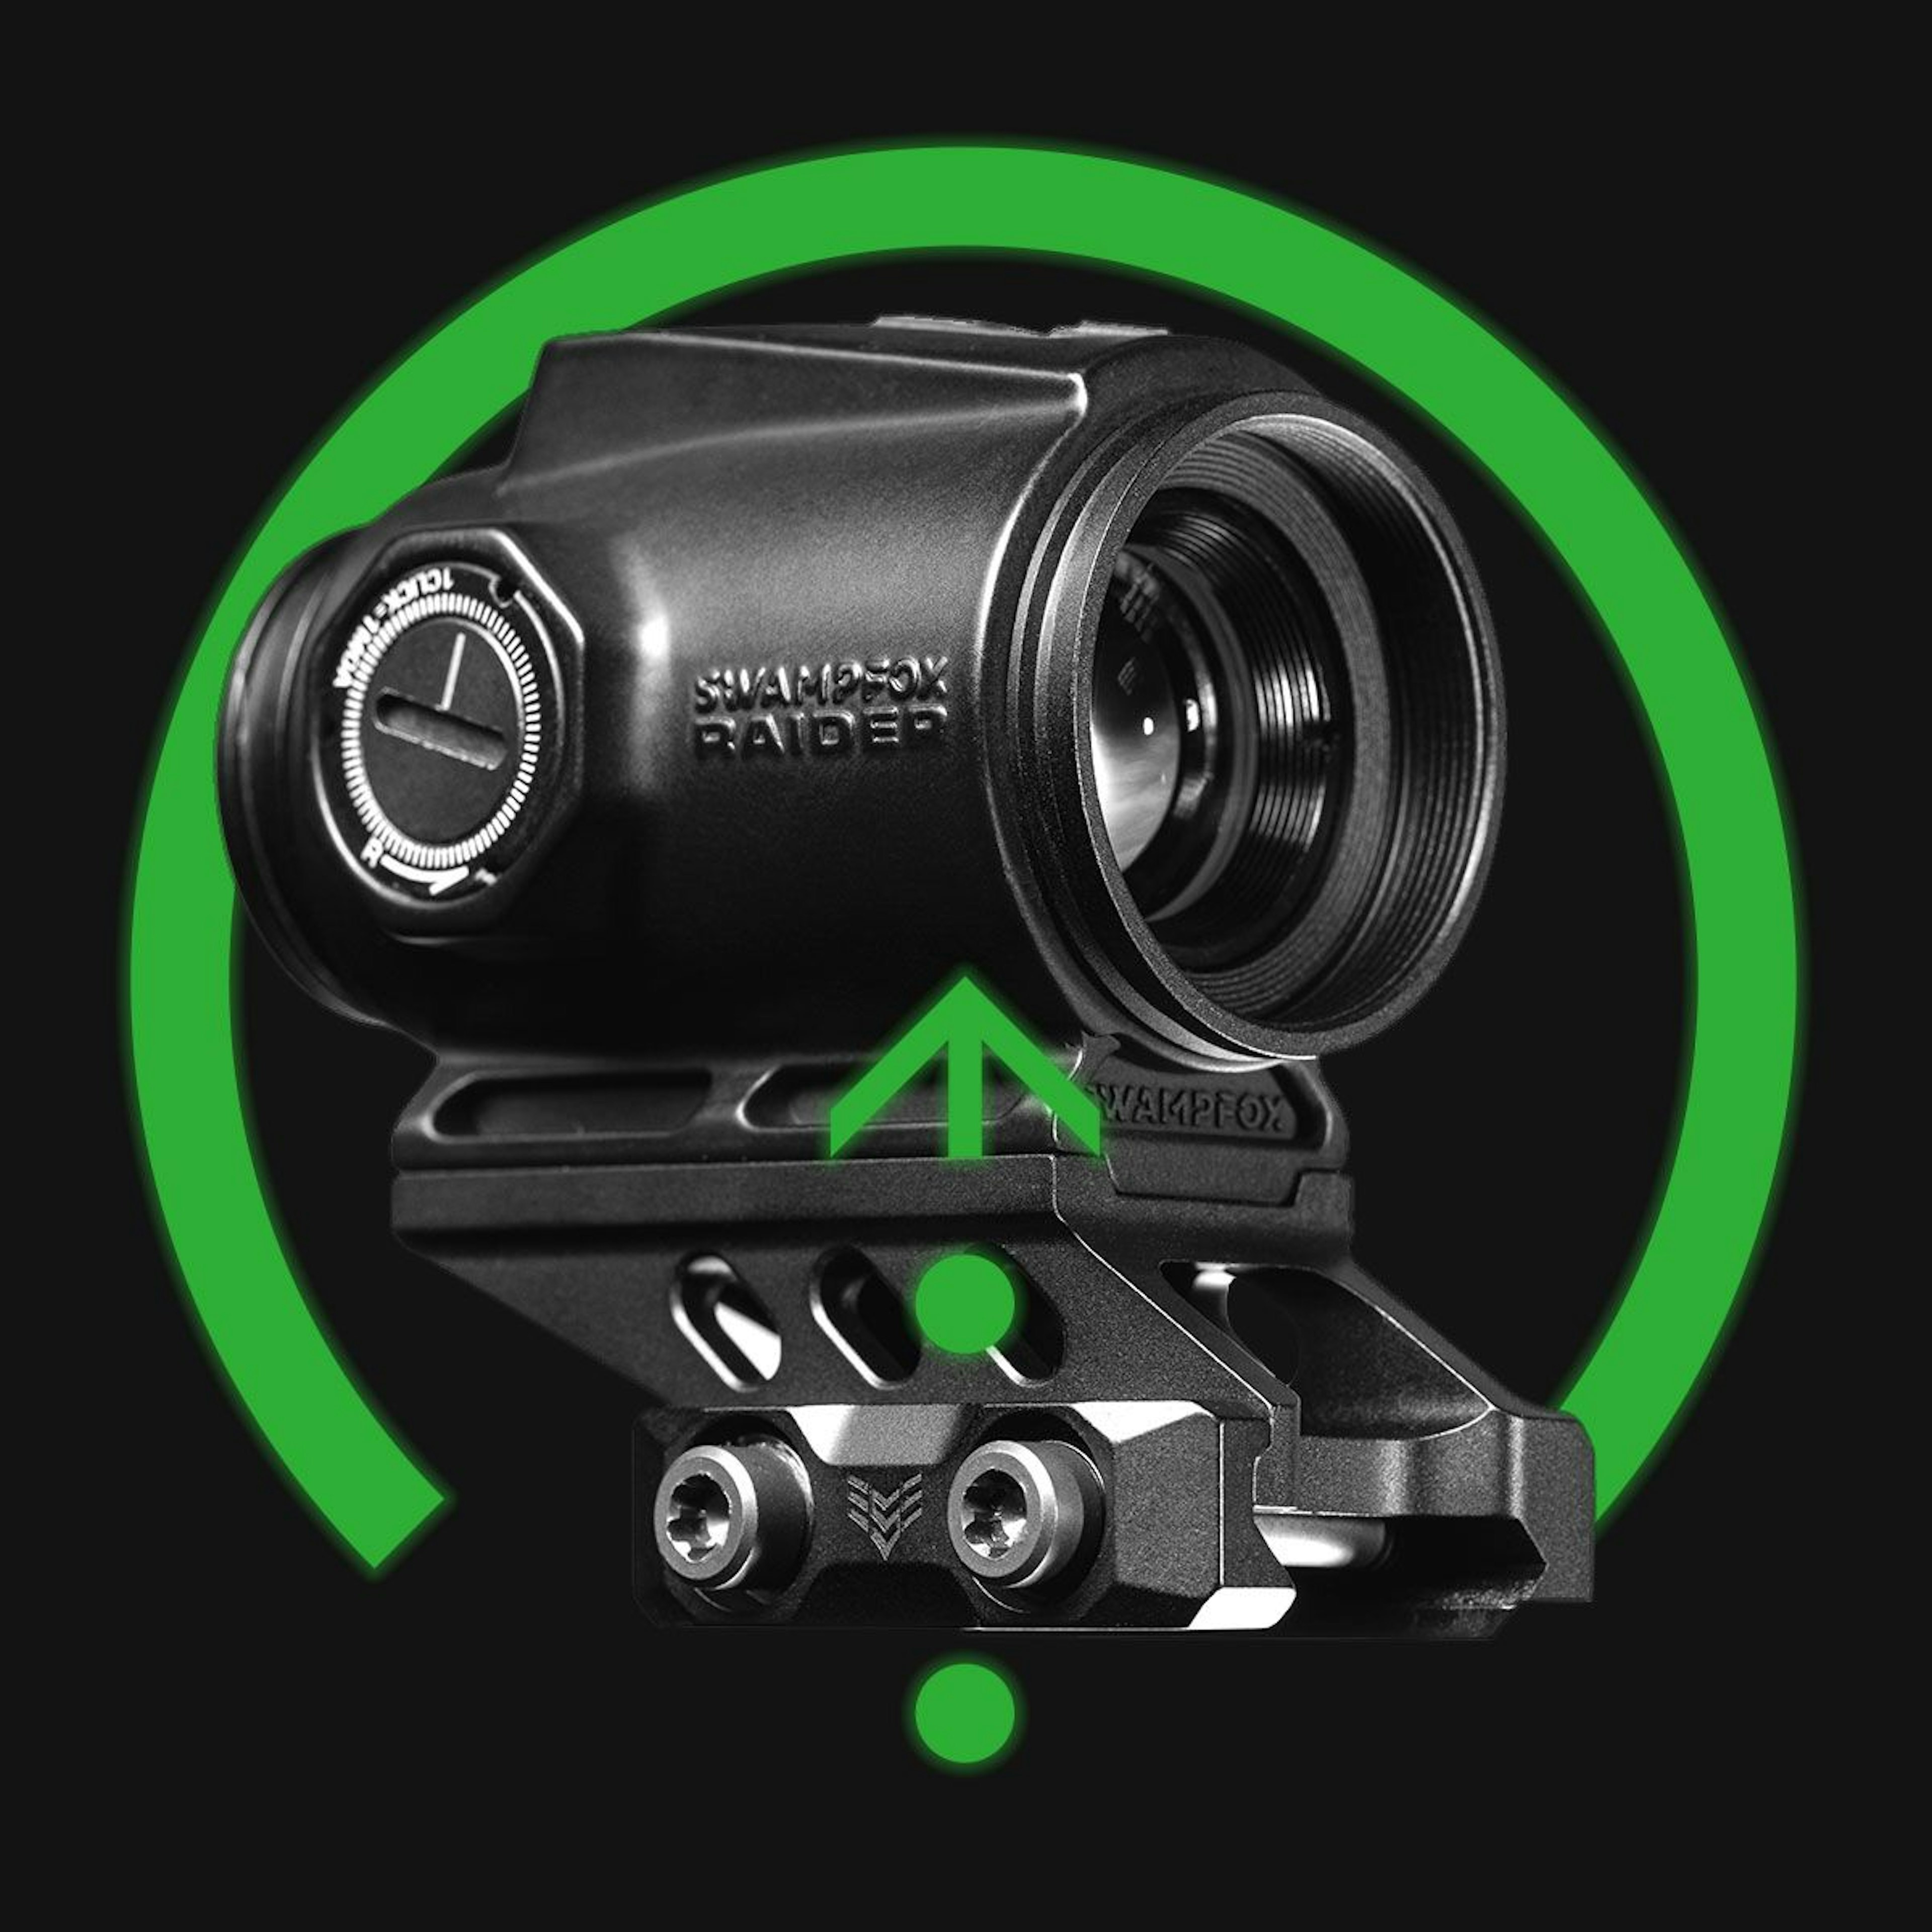 Swampfox Reticle Guide: Prism Scopes